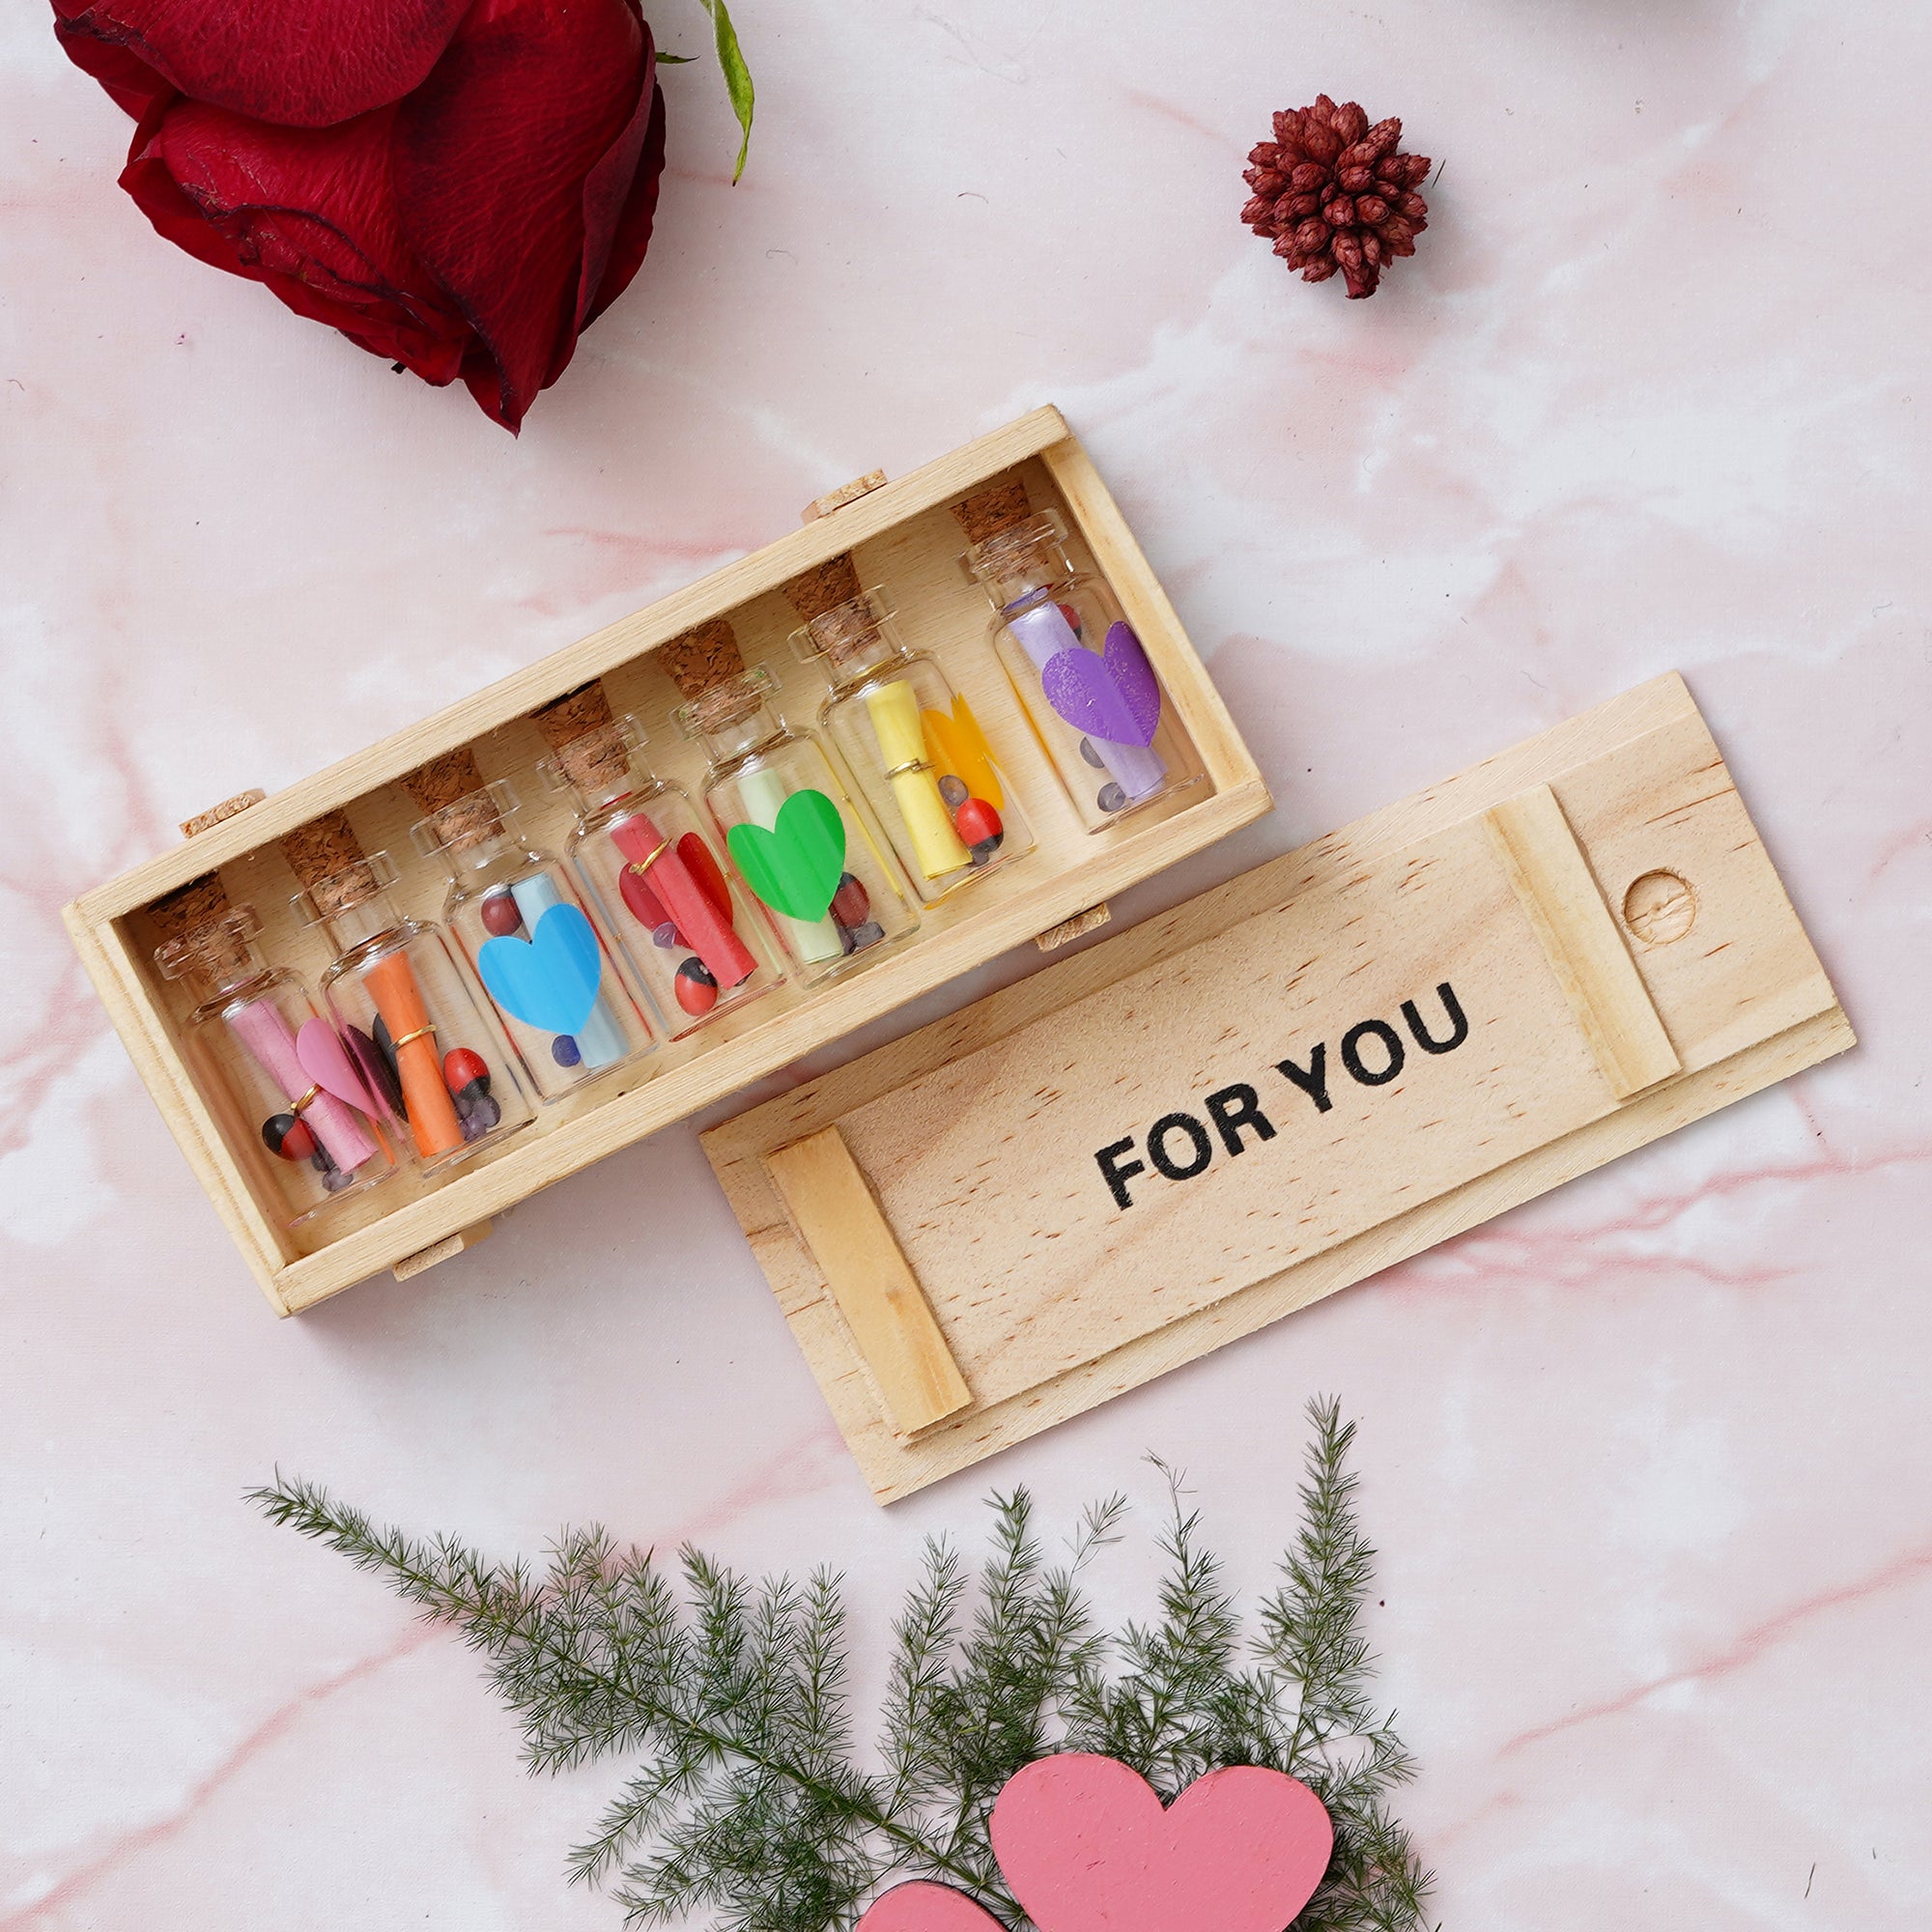 Set Of 7 Personal Messages Greeting Bottles In Wooden Box "For You" 6